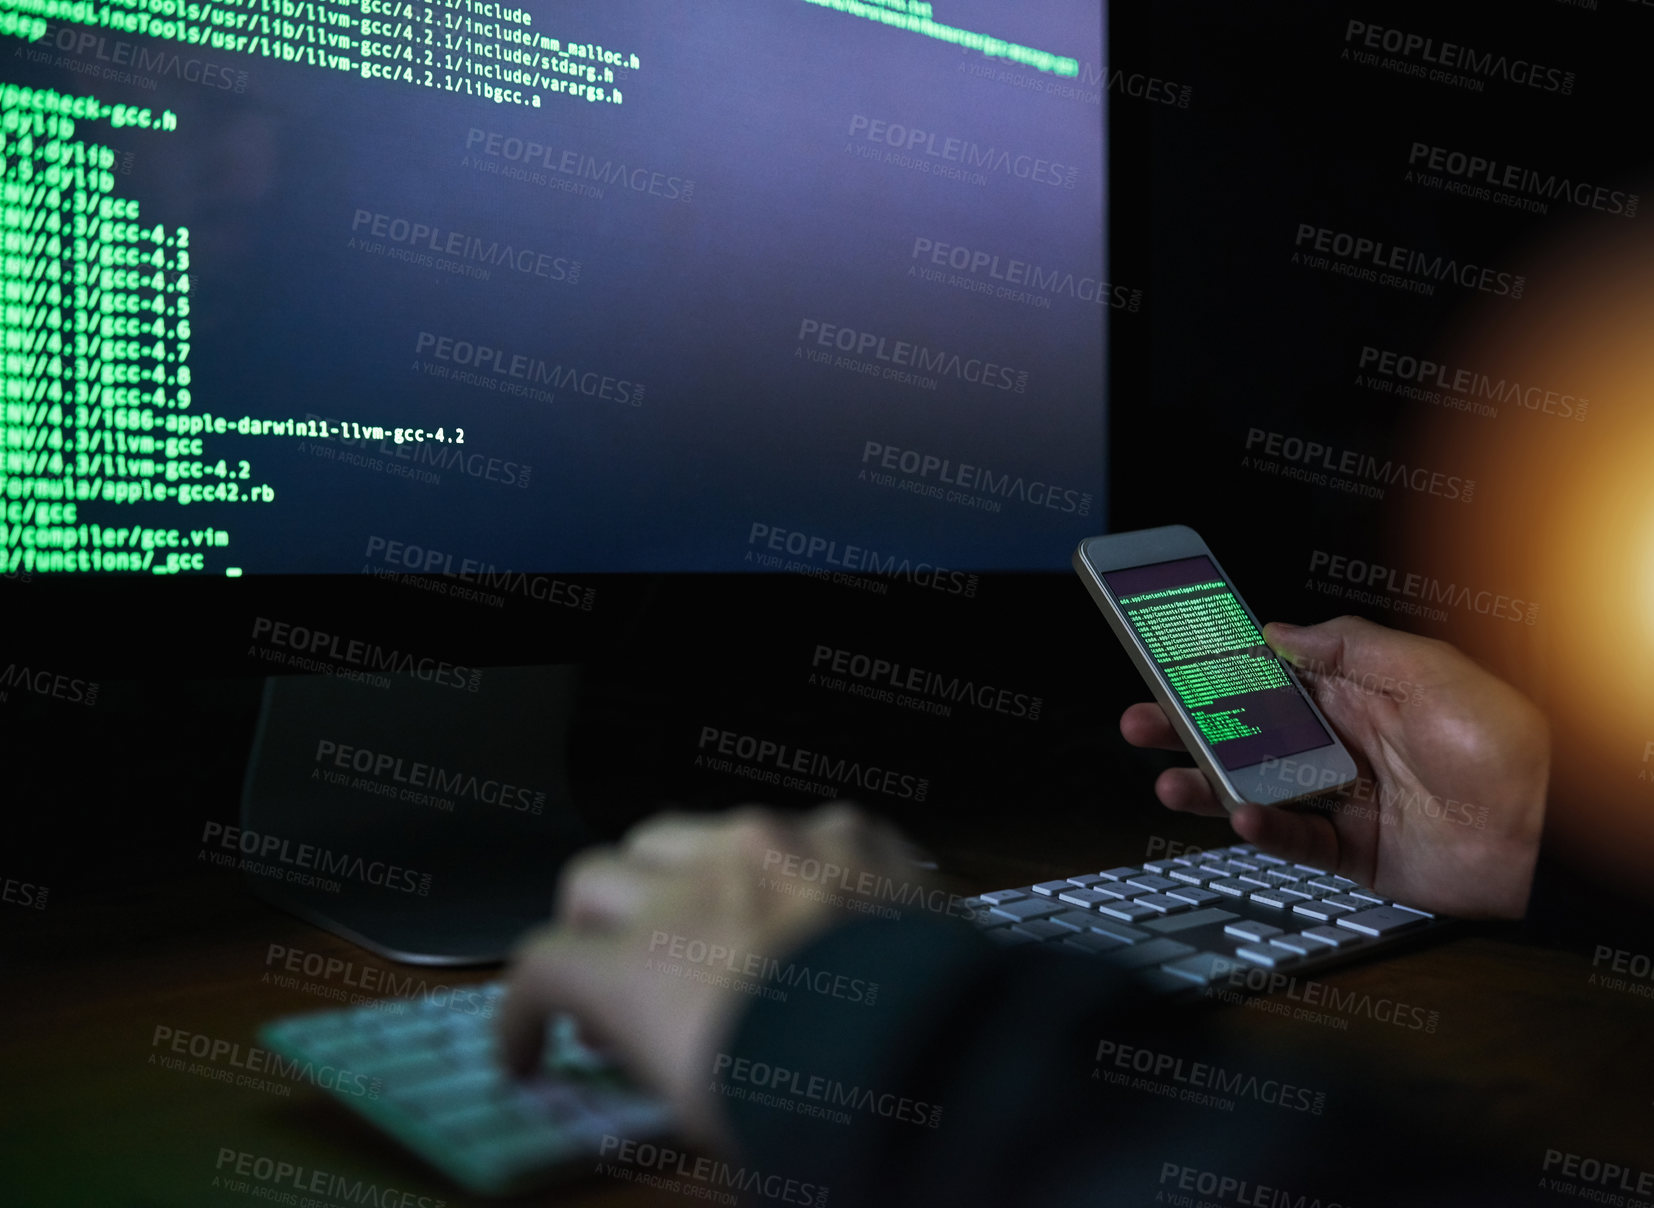 Buy stock photo Shot of an unidentifiable computer hacker using a smartphone to hack into a computer network at night